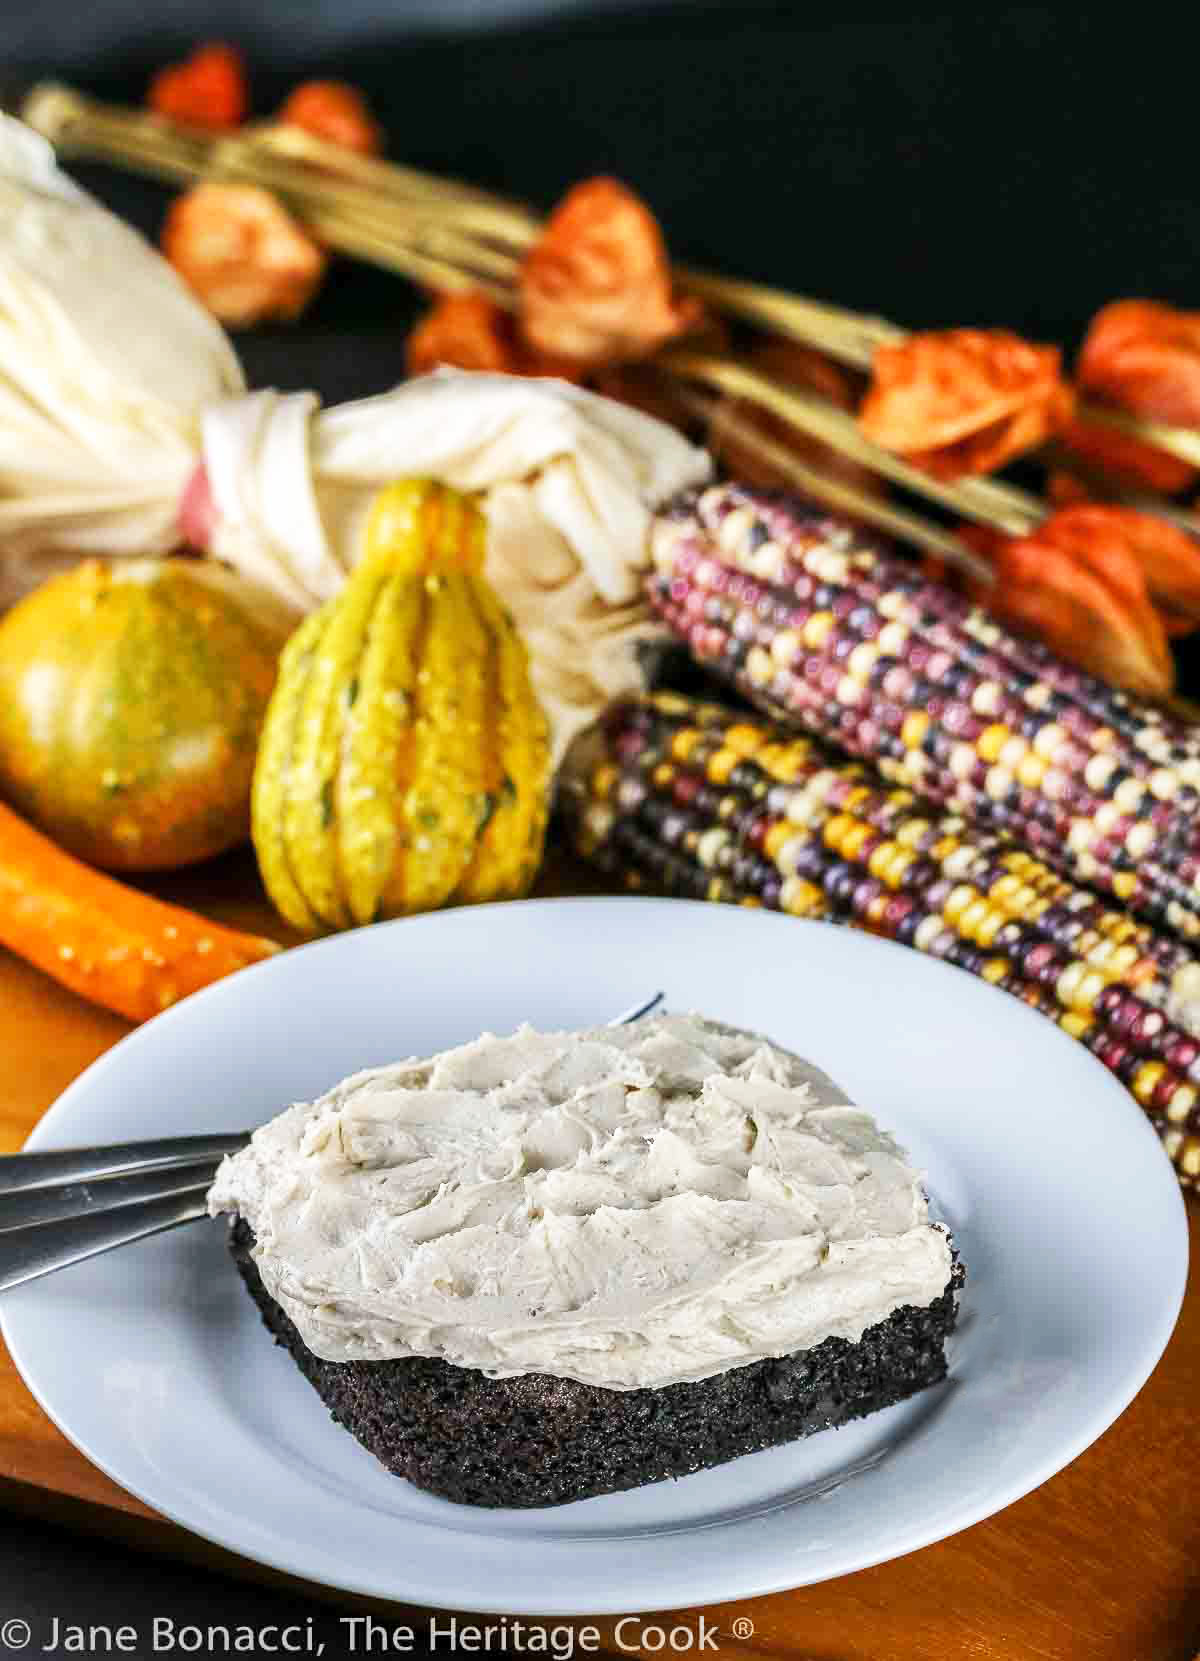 Square of chocolate cake topped with pillows of white maple frosting on a plate in front of seasonal corn cobs, flowers, gourds, etc. © 2023 Jane Bonacci, The Heritage Cook.